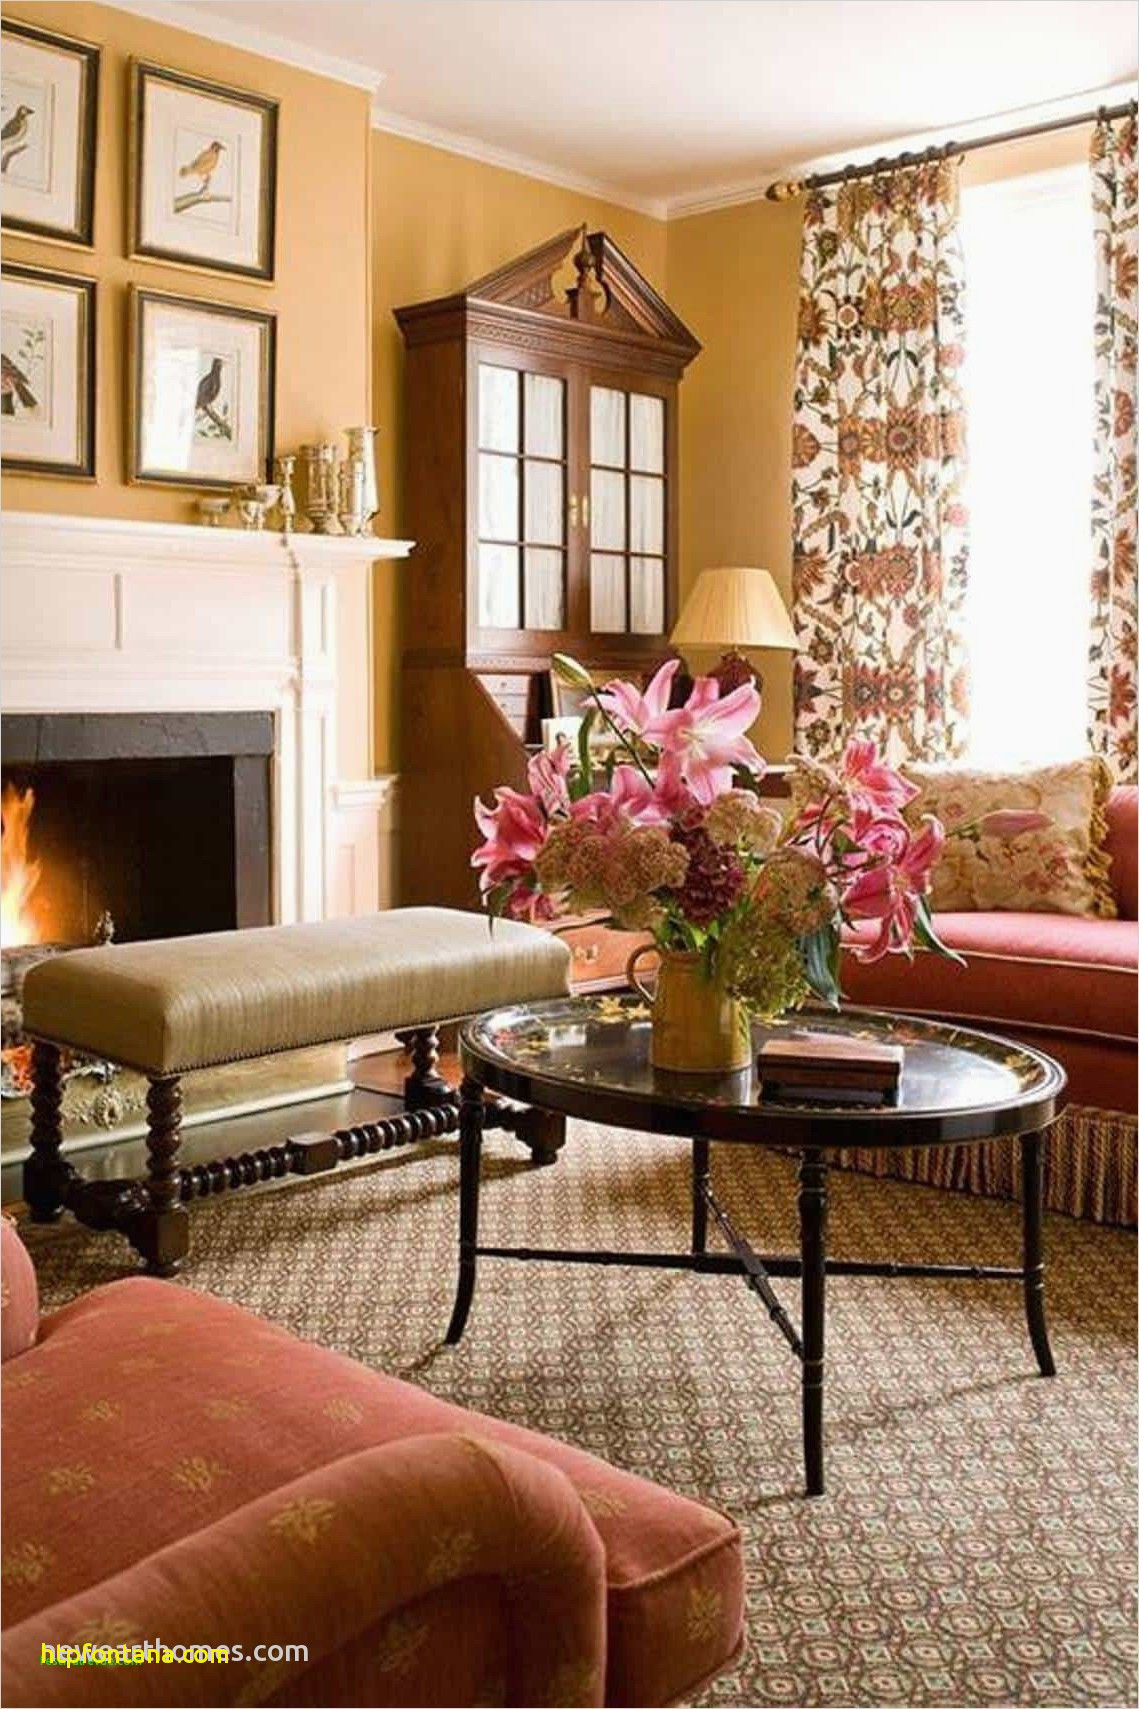 21 Great Big Flower Vases for Sale 2024 free download big flower vases for sale of 31 best of large wall decor for living room stock living room inside living room flower vaseh vases vase like architecture interior design follow us i 0d from wa